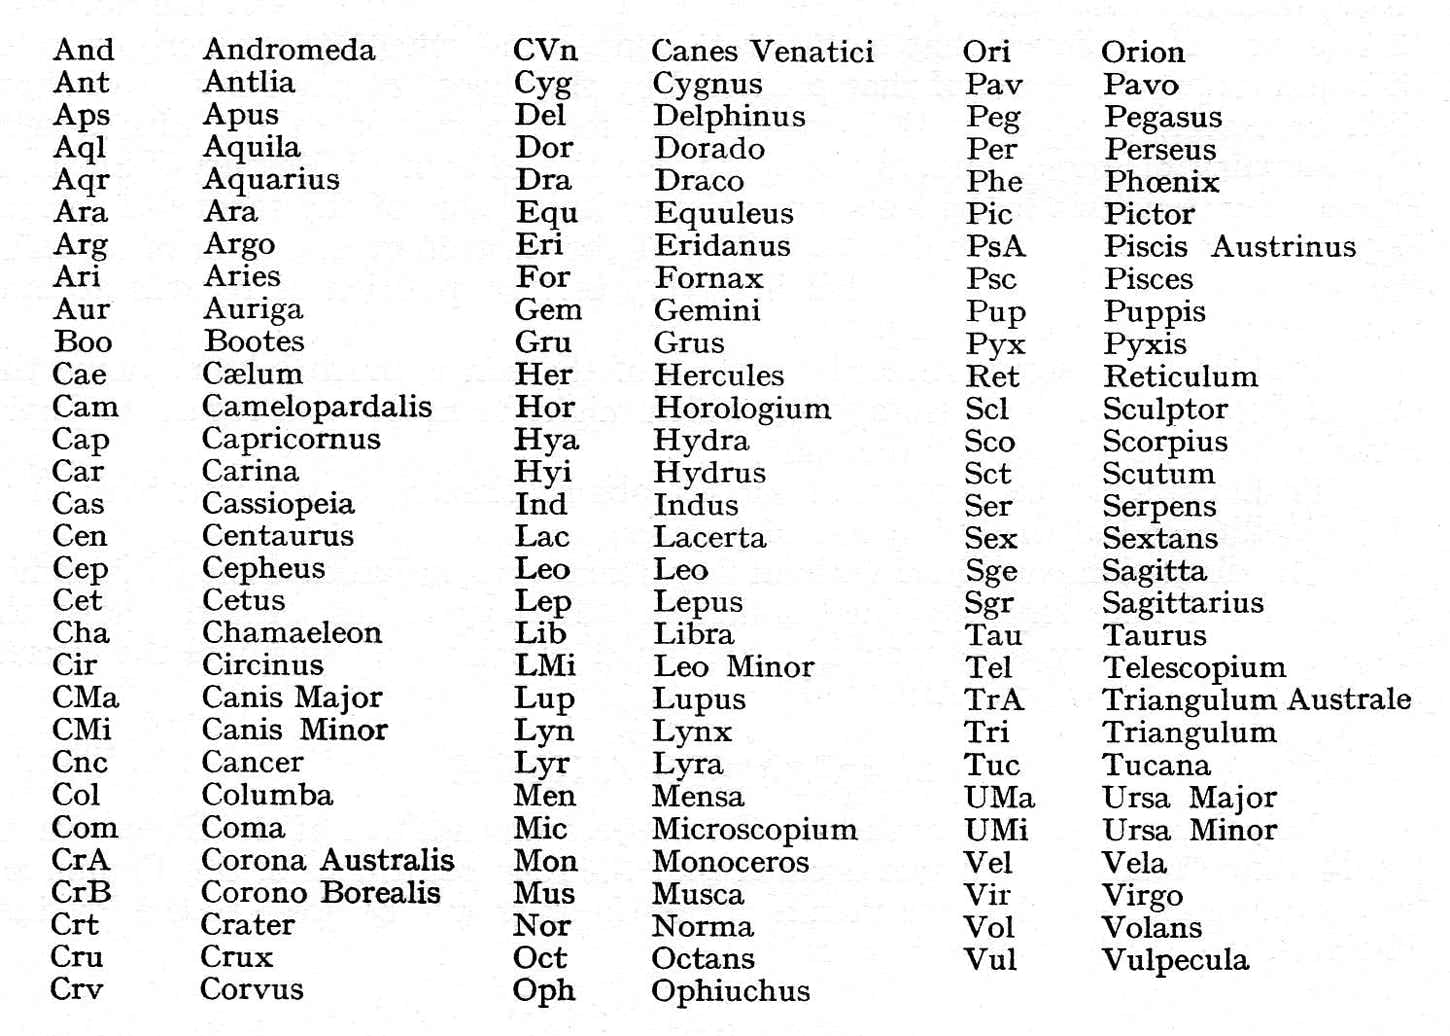 IAU 1922 list of the 88 constellations and their abbreviations